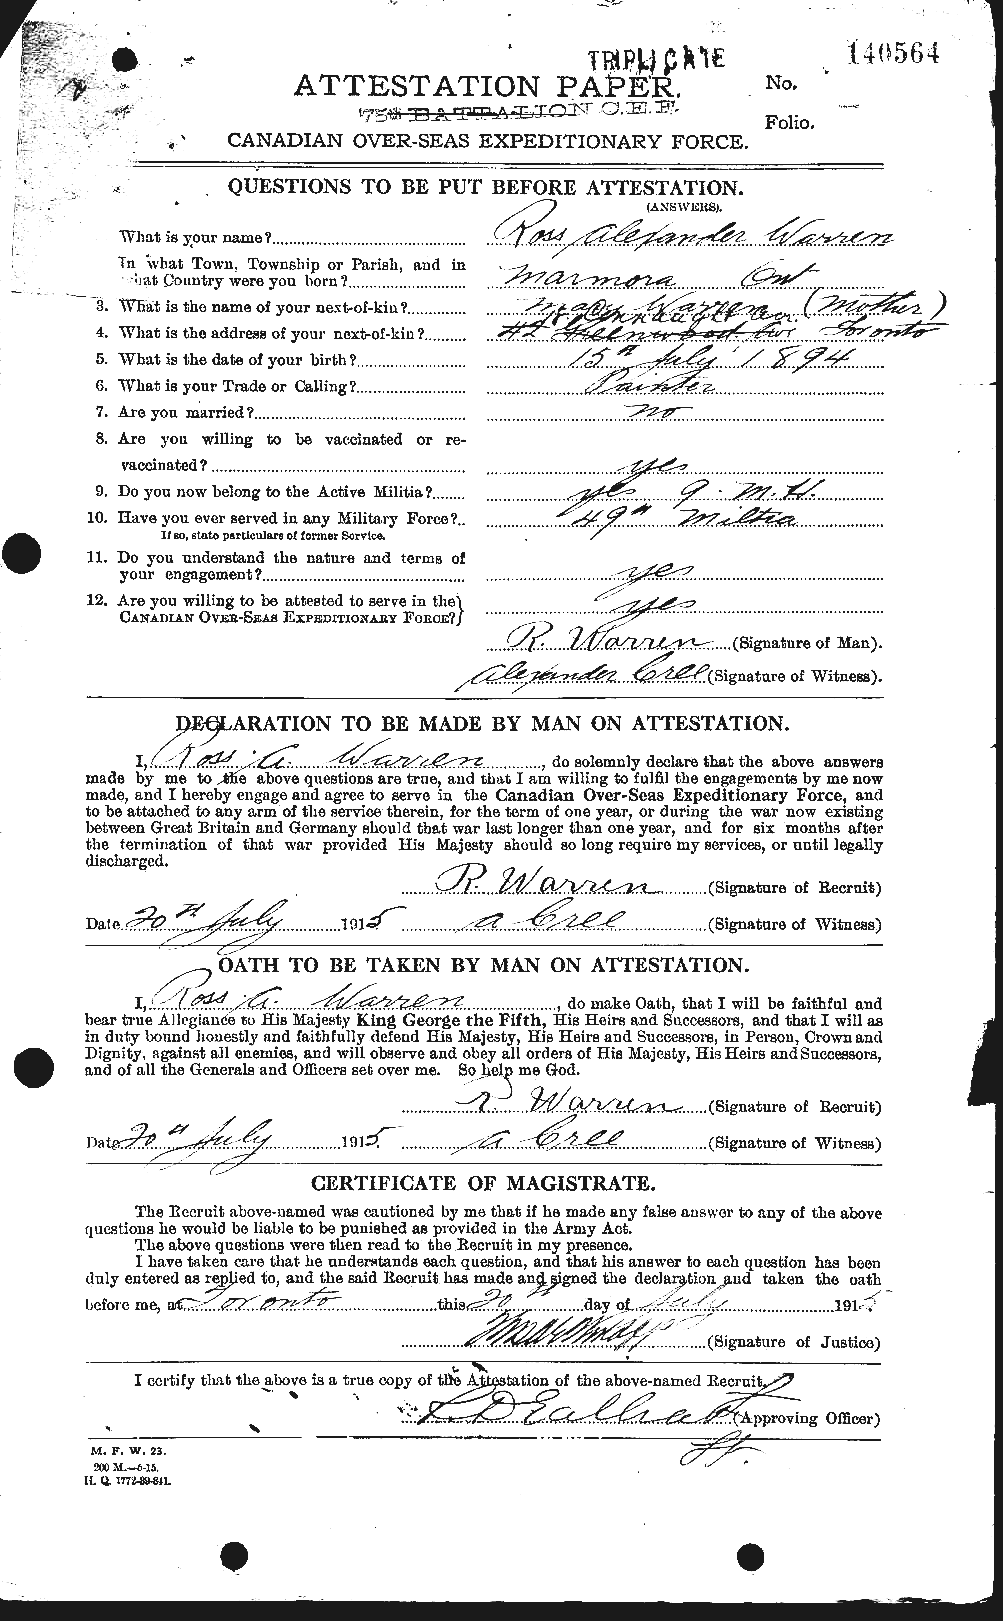 Personnel Records of the First World War - CEF 658627a